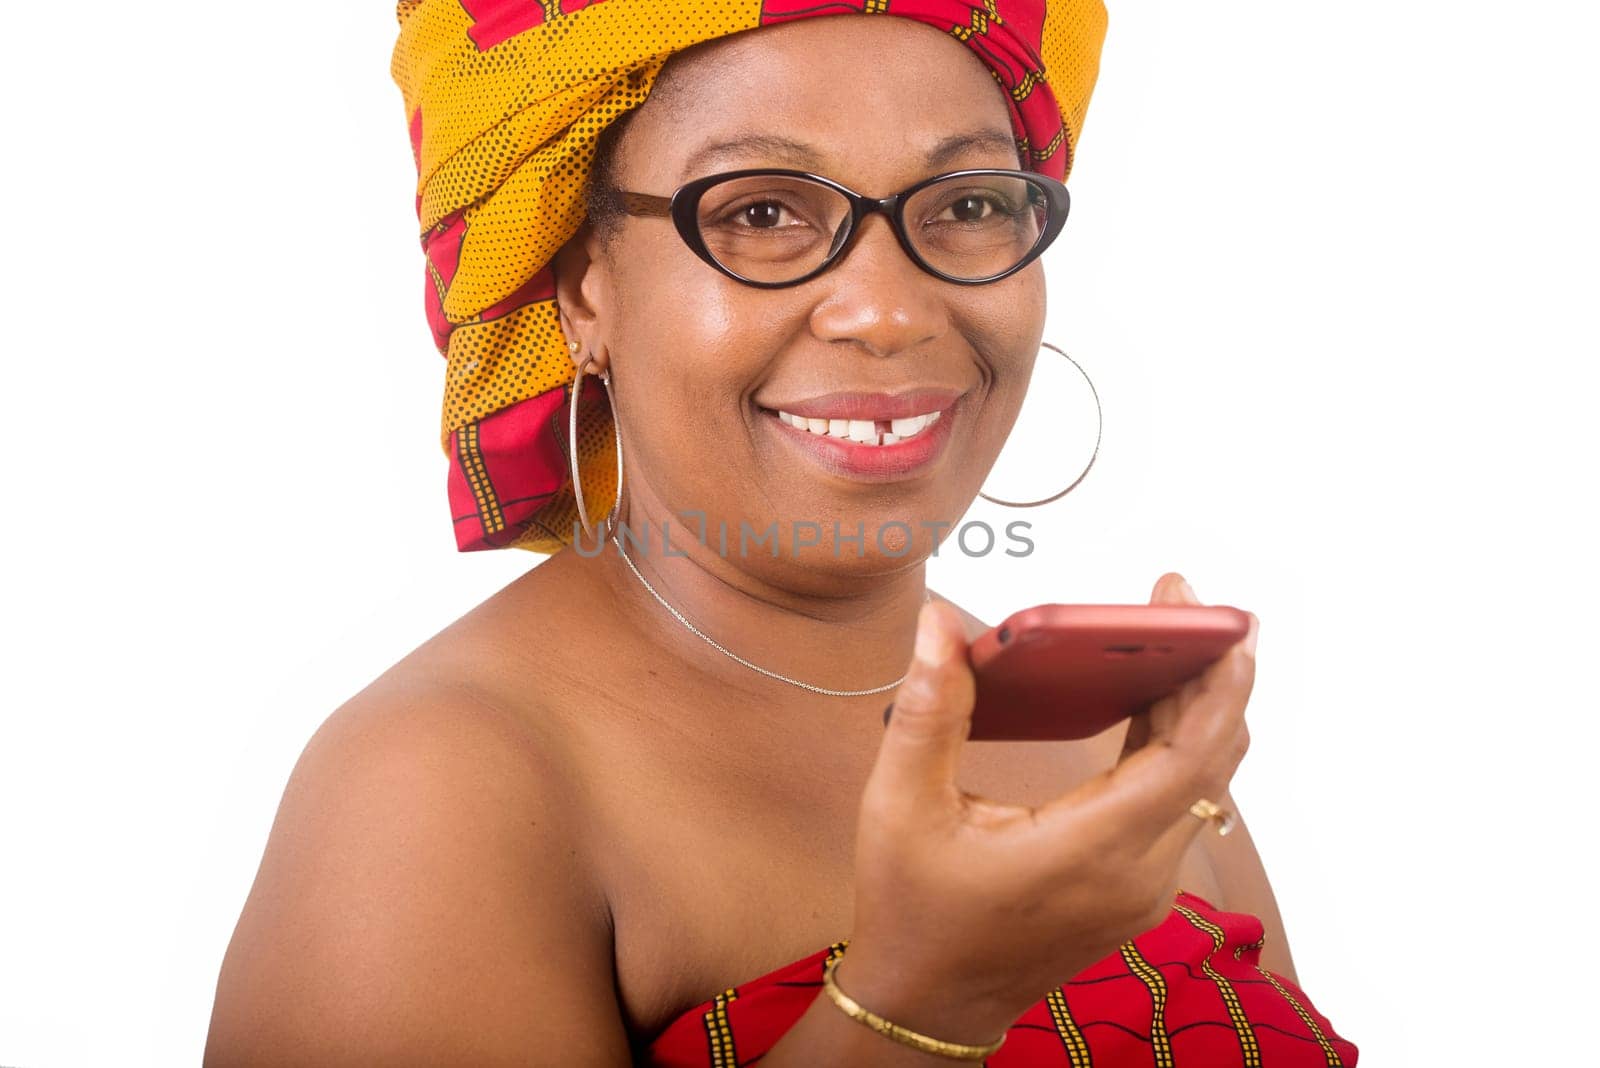 mature woman in traditional dress standing on white background communicating on mobile phone and looking at camera smiling.